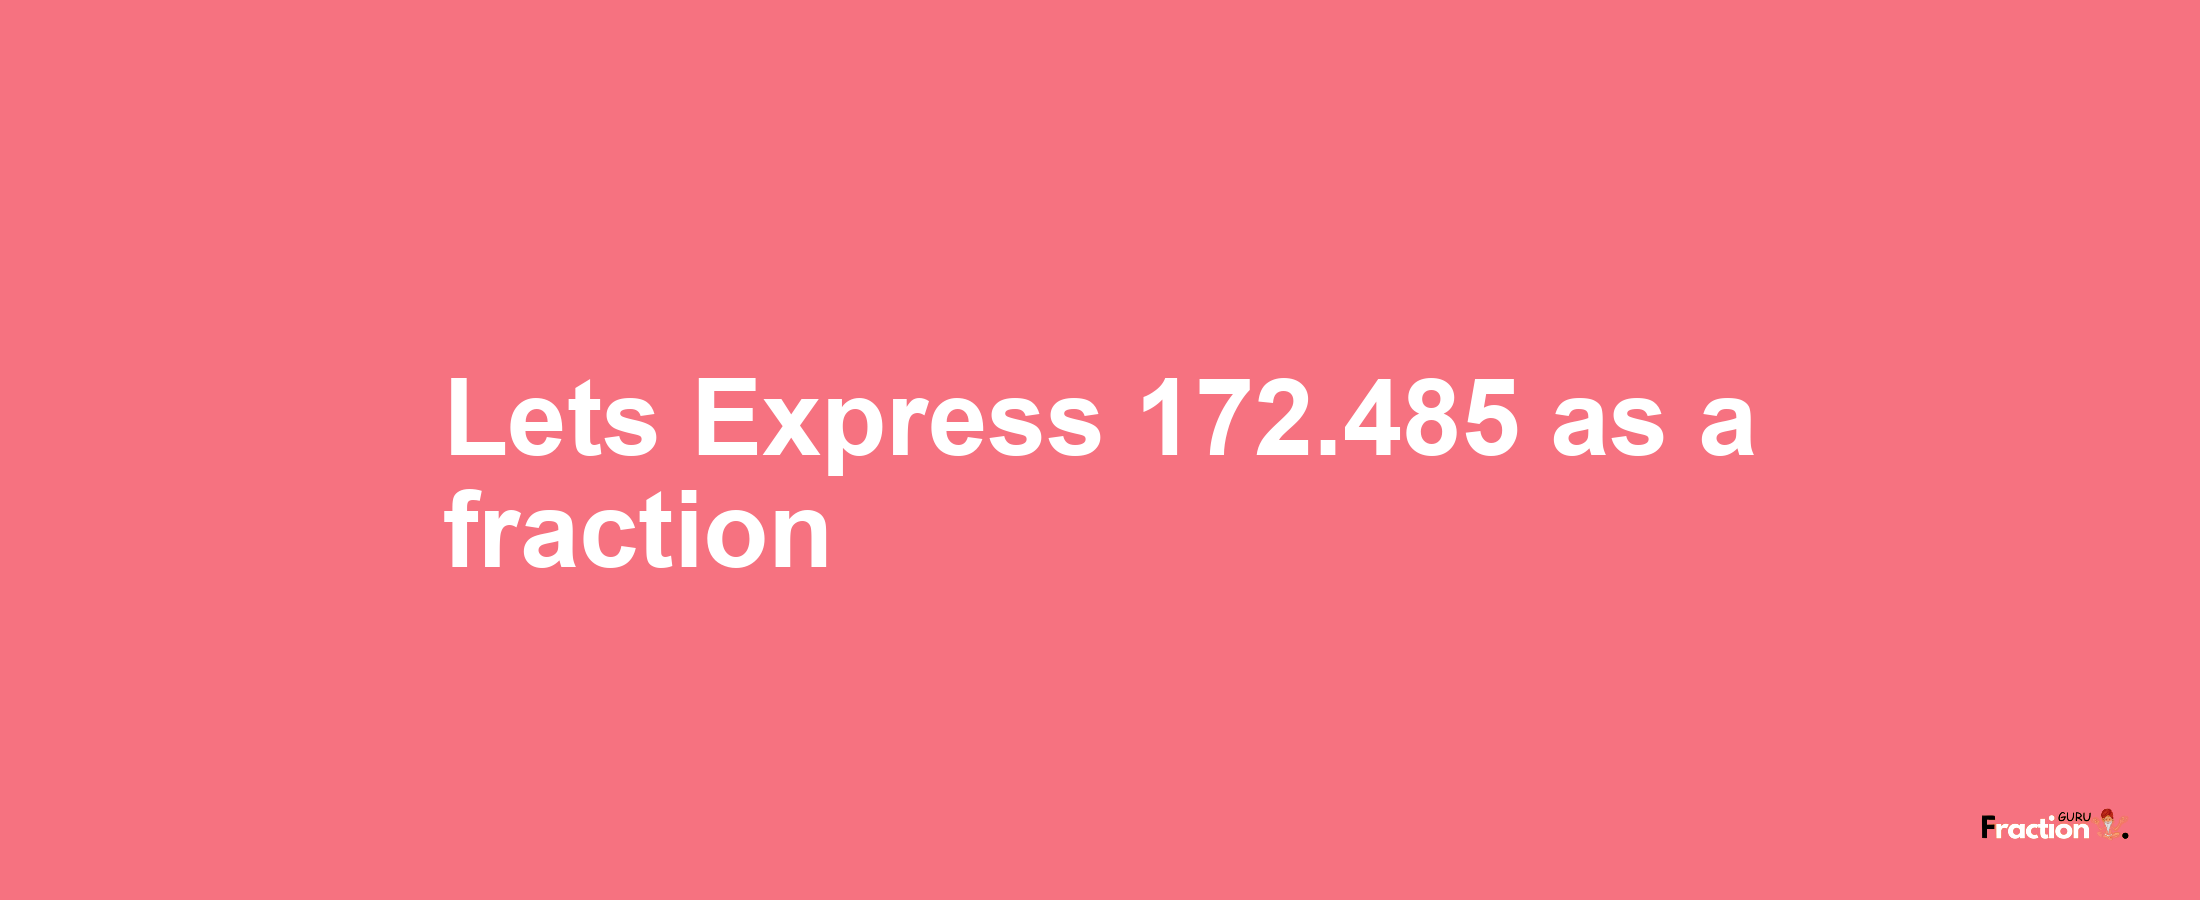 Lets Express 172.485 as afraction